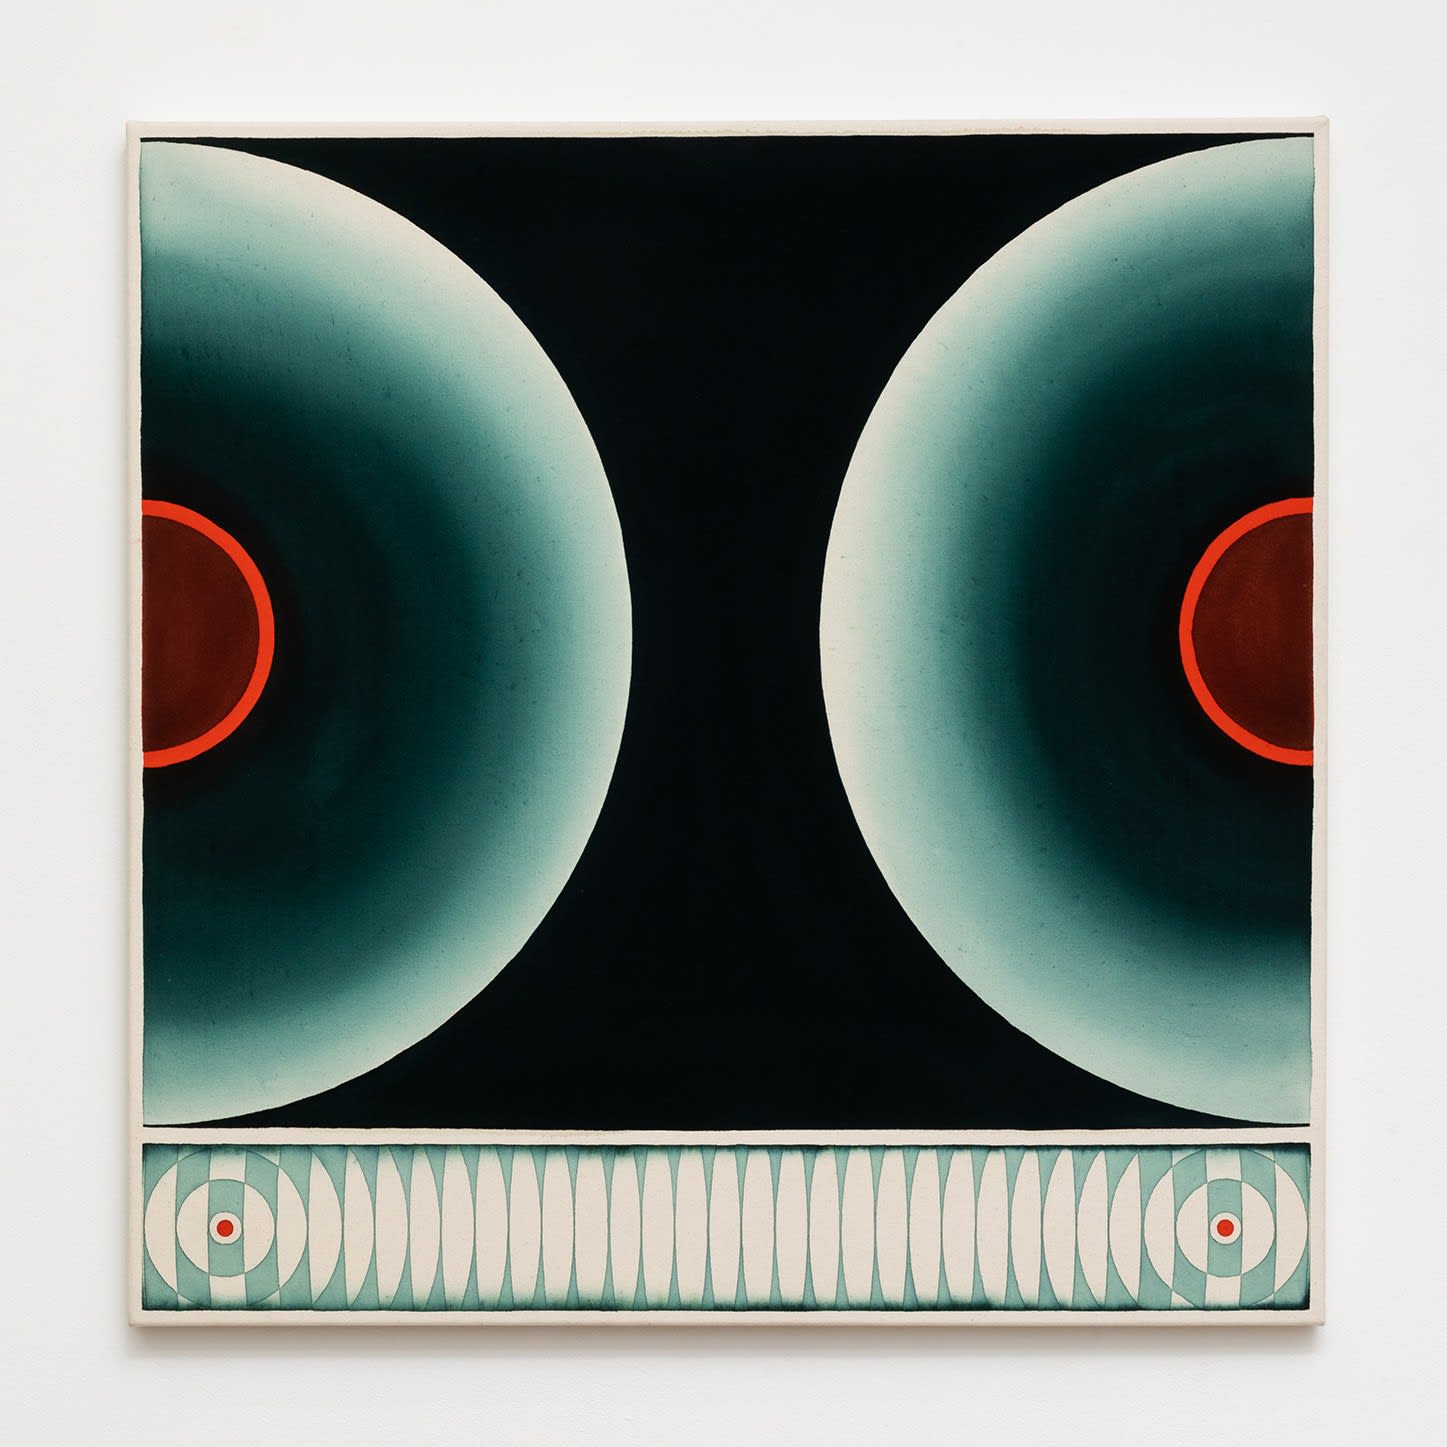 Painting featuring a symmetrical composition of two semi circles in white, viridian, and red center against a dark background.